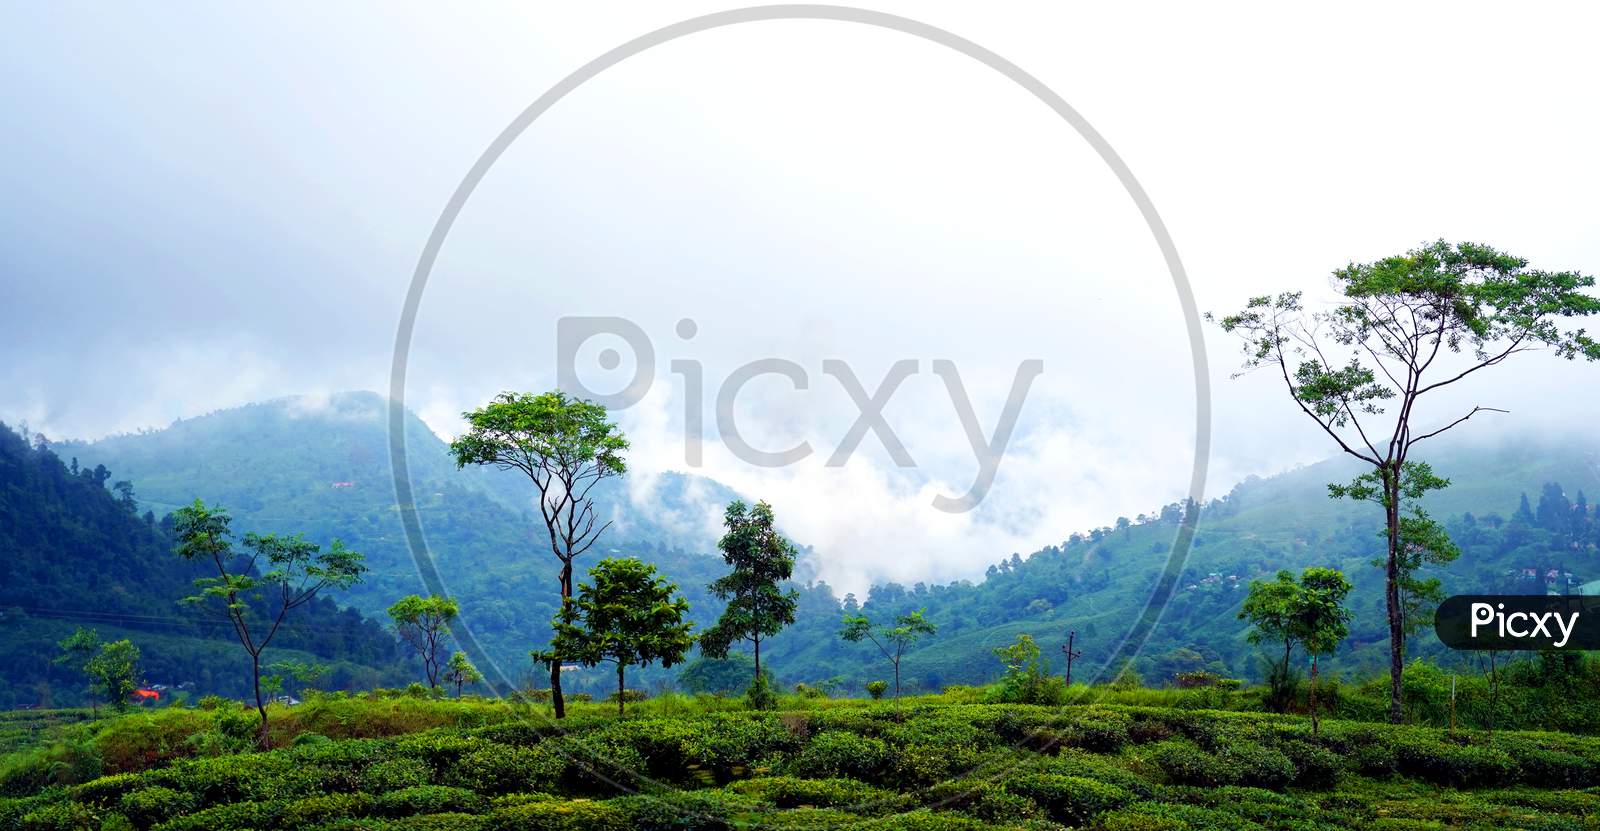 Darjeeling is a town in India's West Bengal state, in the Himalayan foothills.